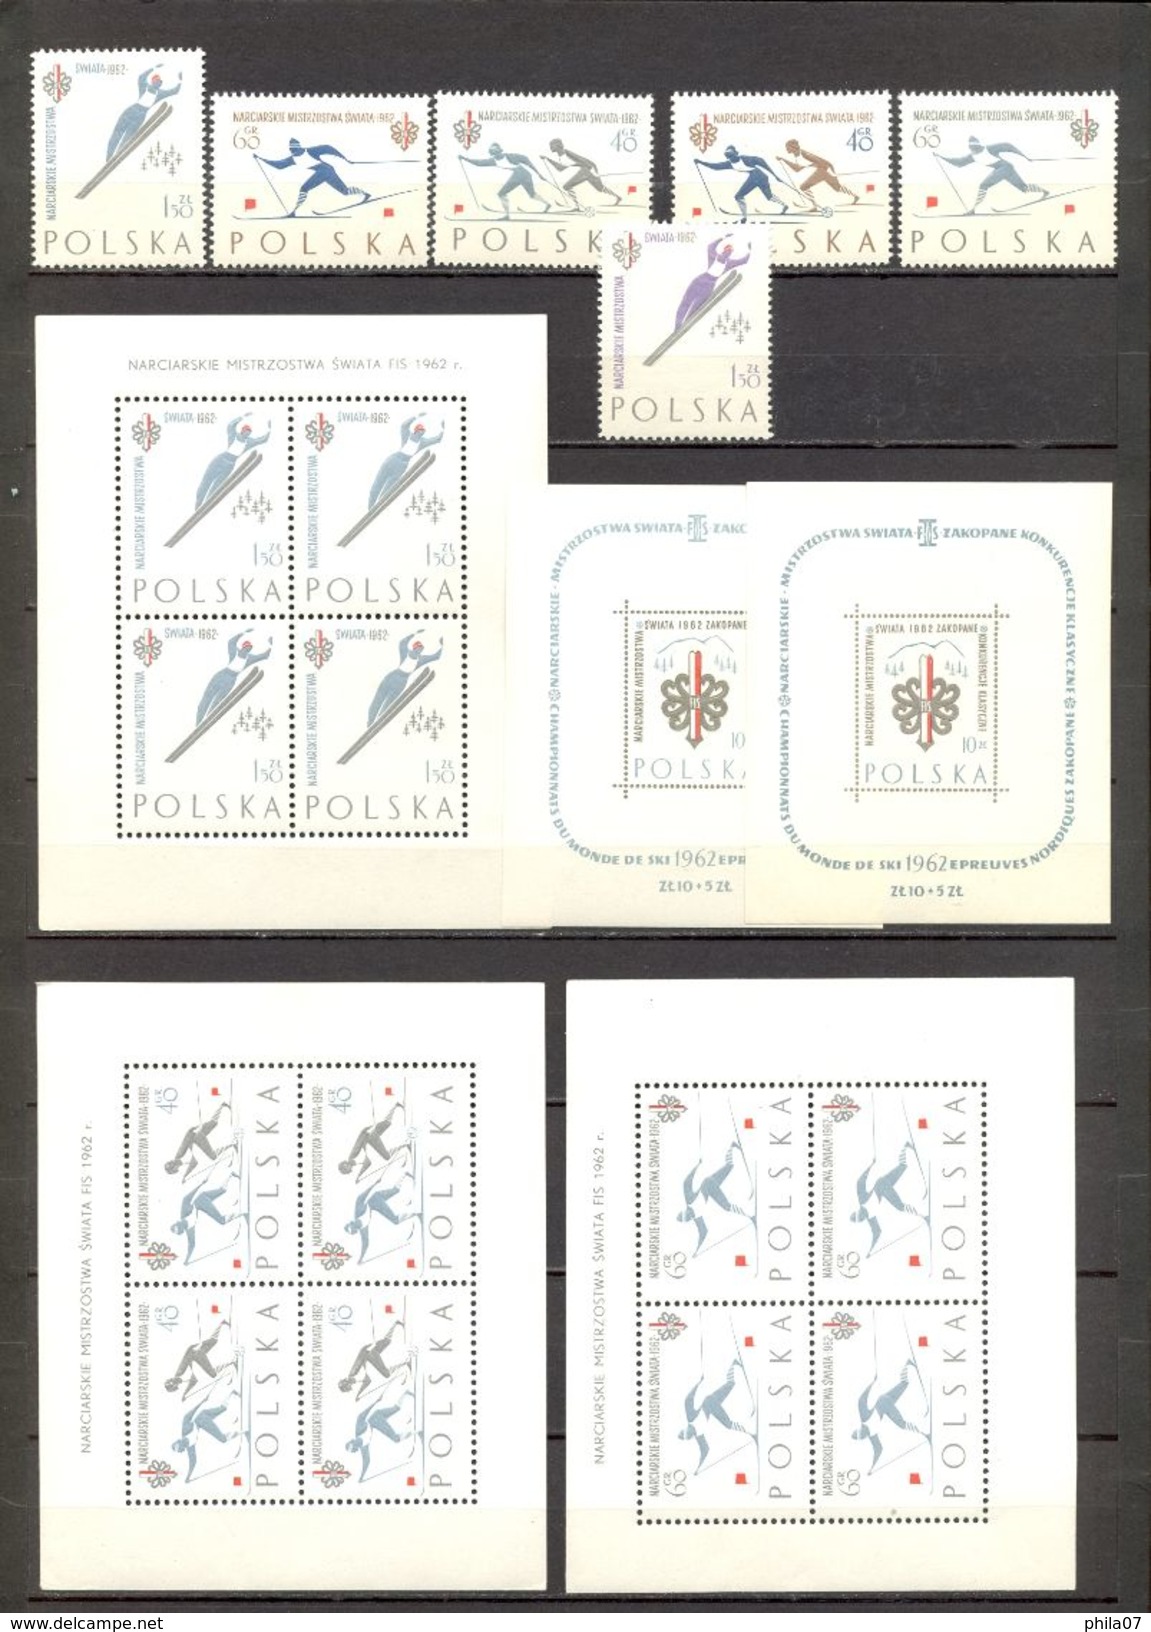 Poland - 1962, SWIATA FIS, Two Blocks, Sheet And Series, All MNH. / See Scans, 5 Scans - Ungebraucht